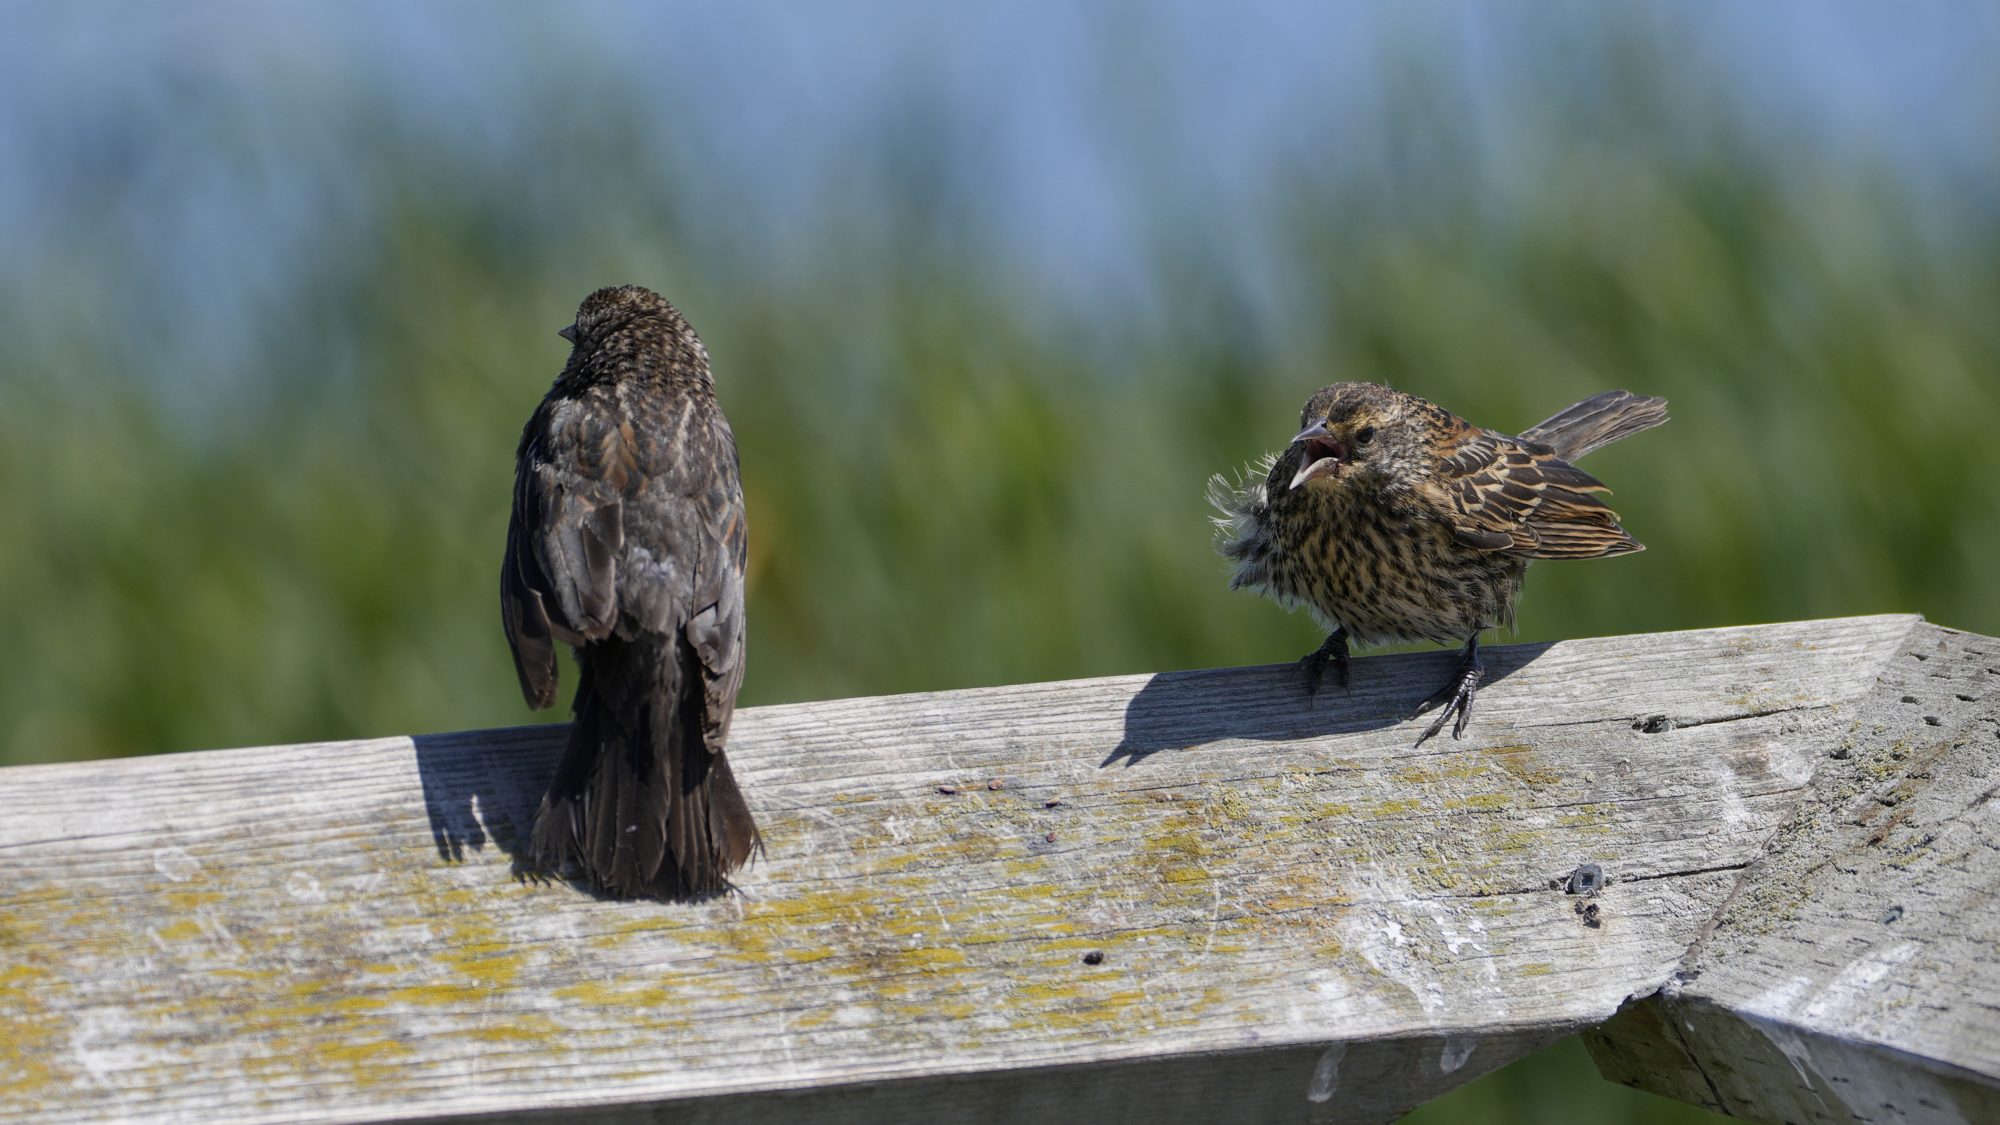 A Red-winged Blackbird mother and child are on a wooden railing. The child is screaming for her attention